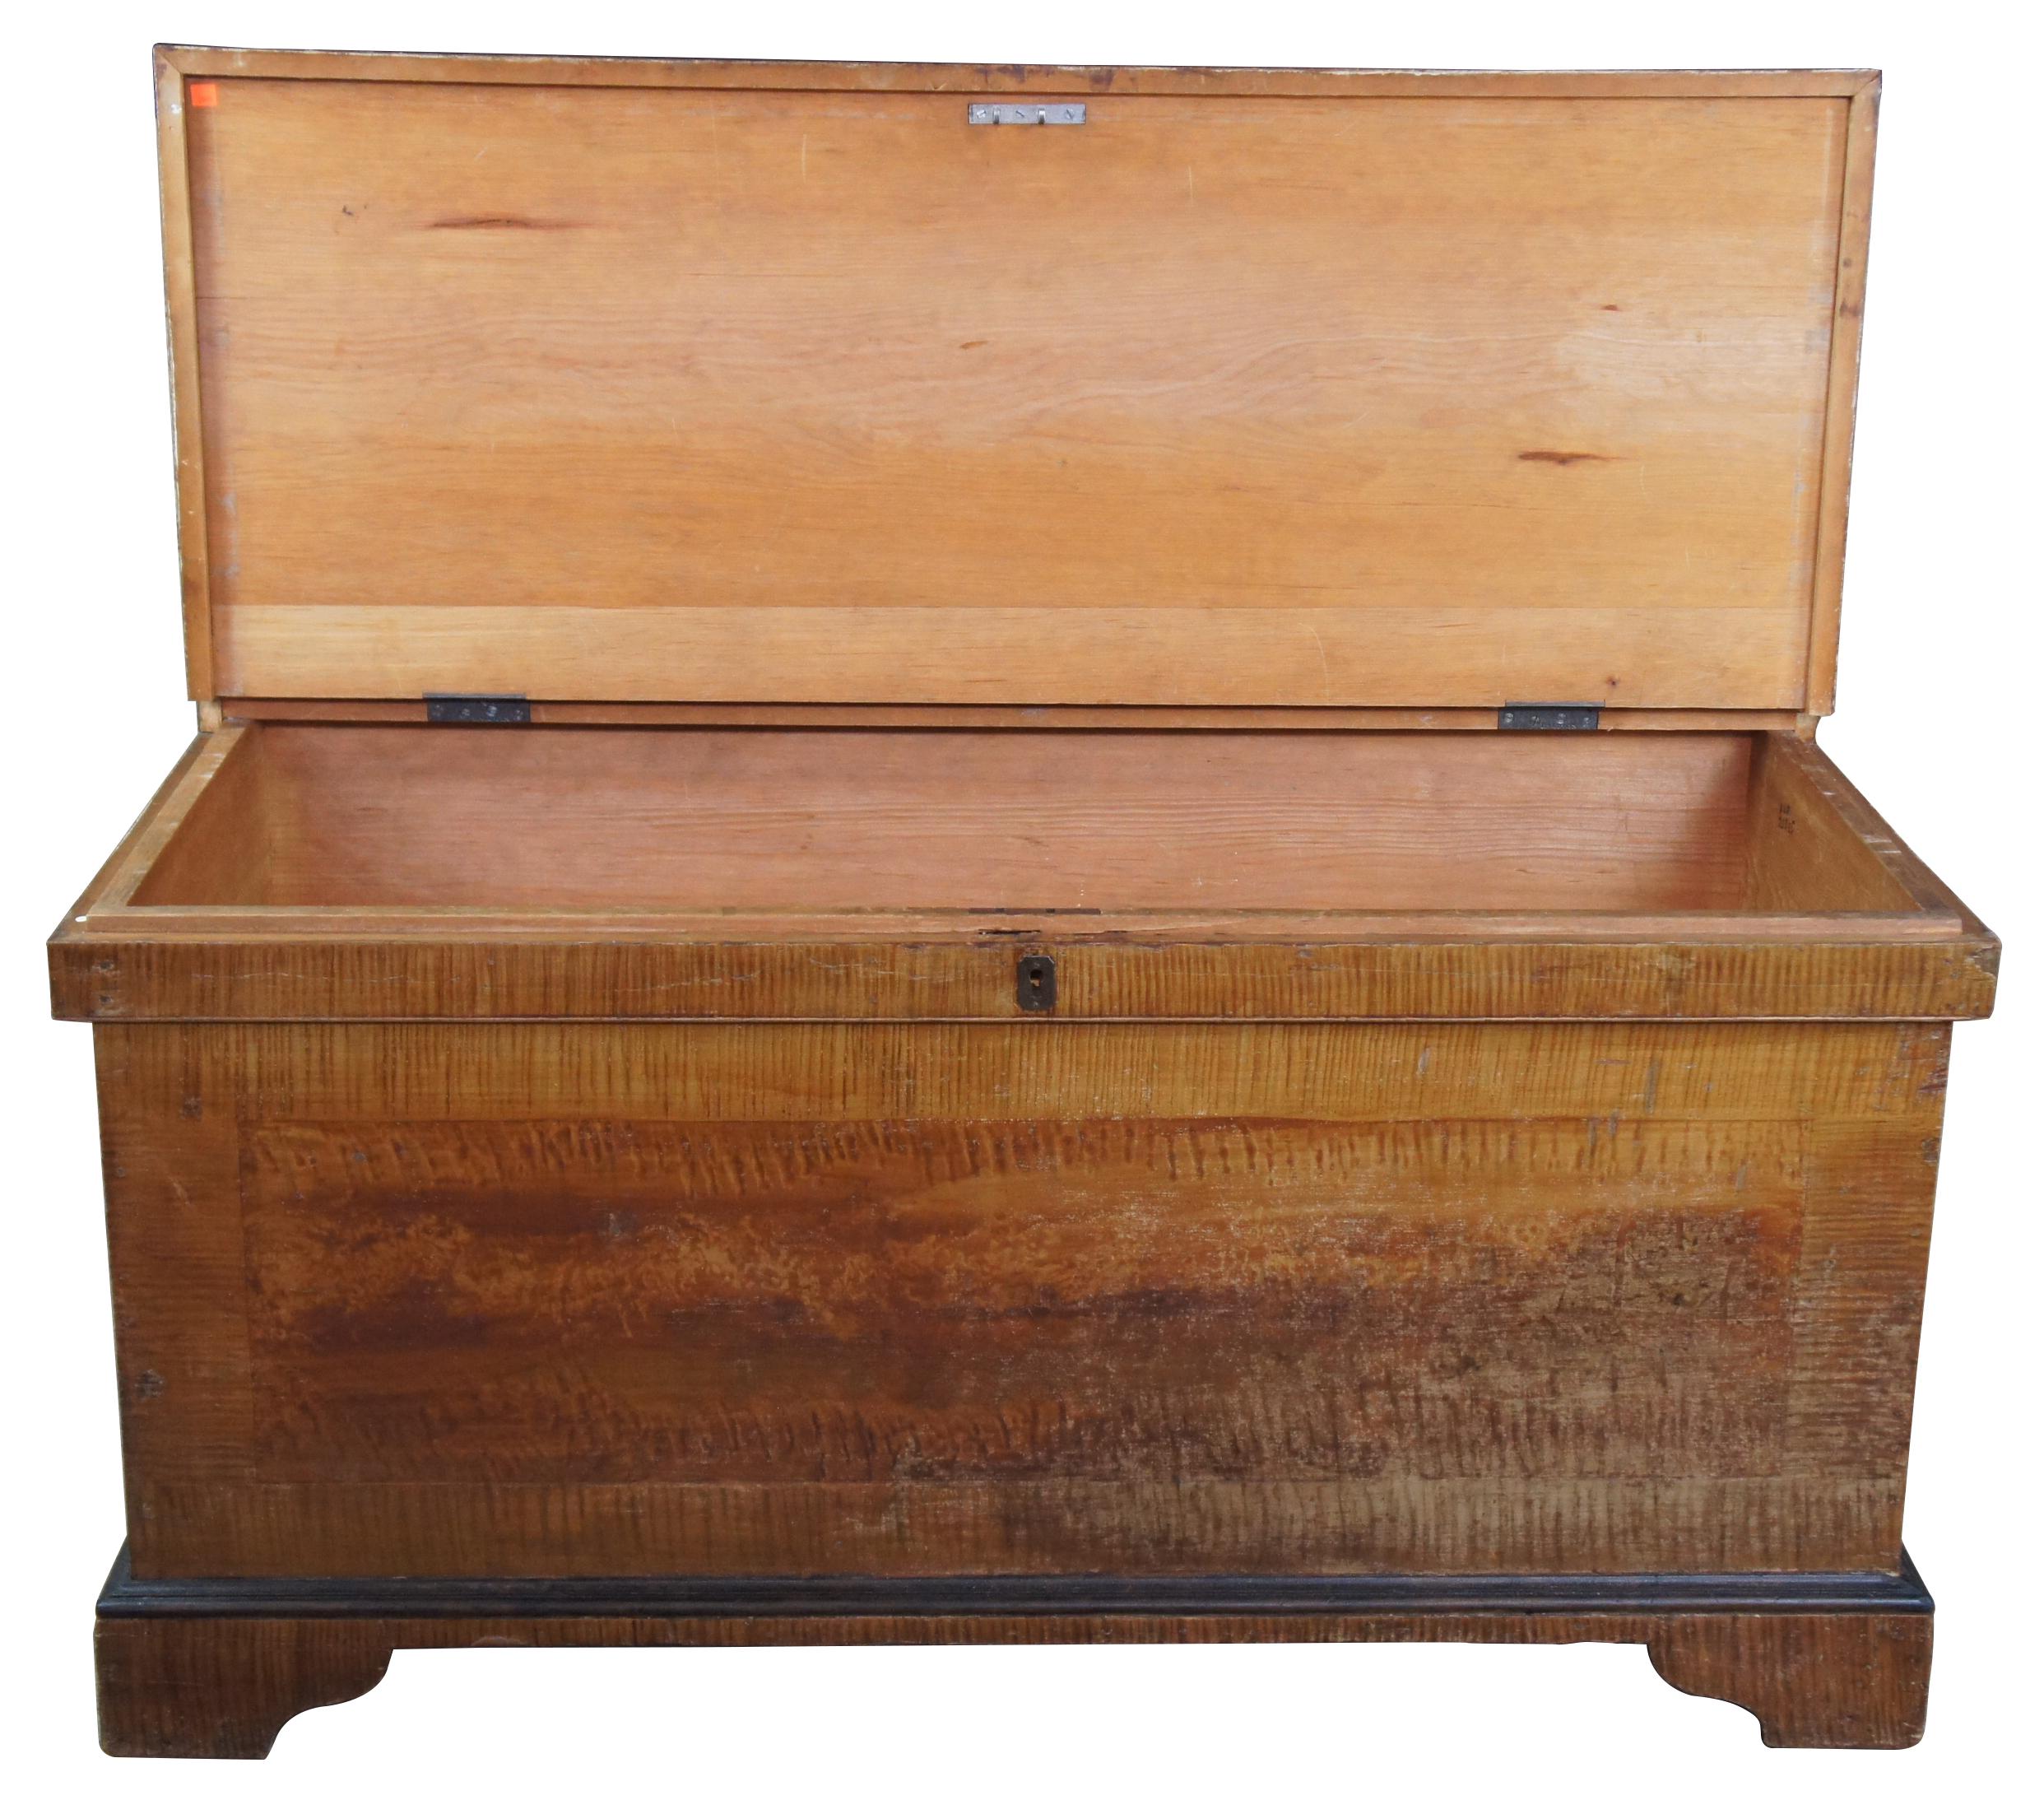 Early 1800s Pennsylvania chest. Made from pine with a tiger maple painted grain exterior. Features inset heavy duty iron handles and bracket feet.